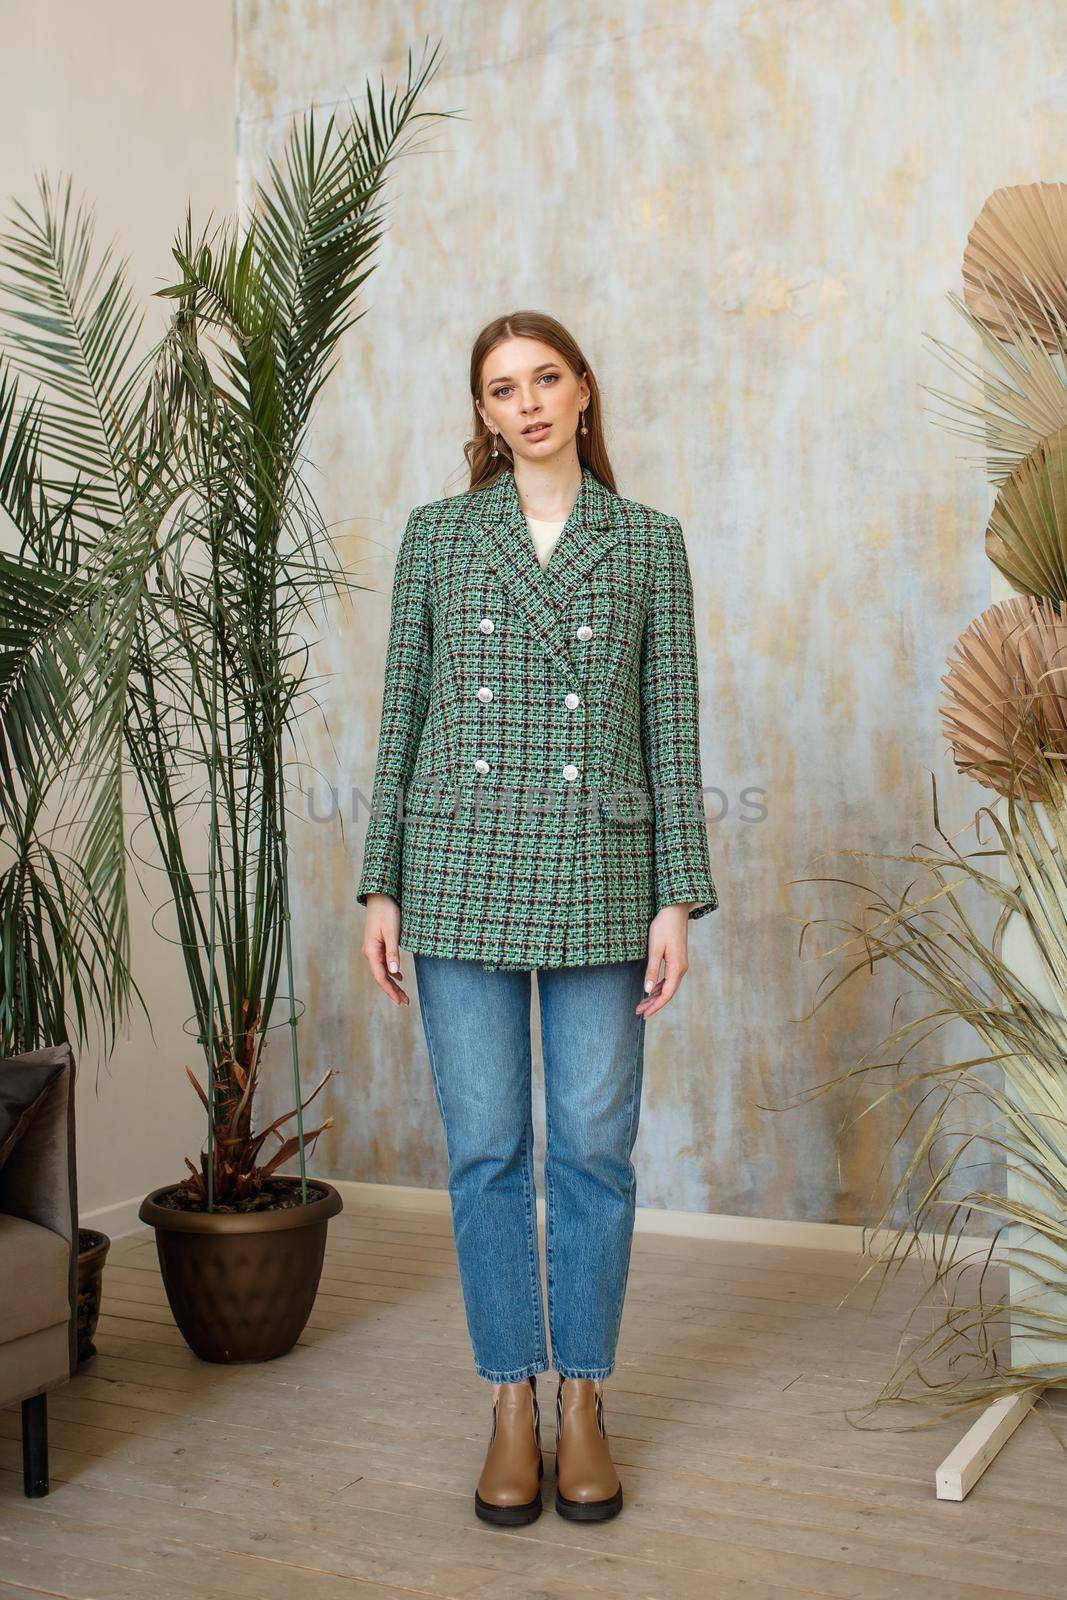 A girl in a green fashionable jacket and blue jeans on a studio background with plants.